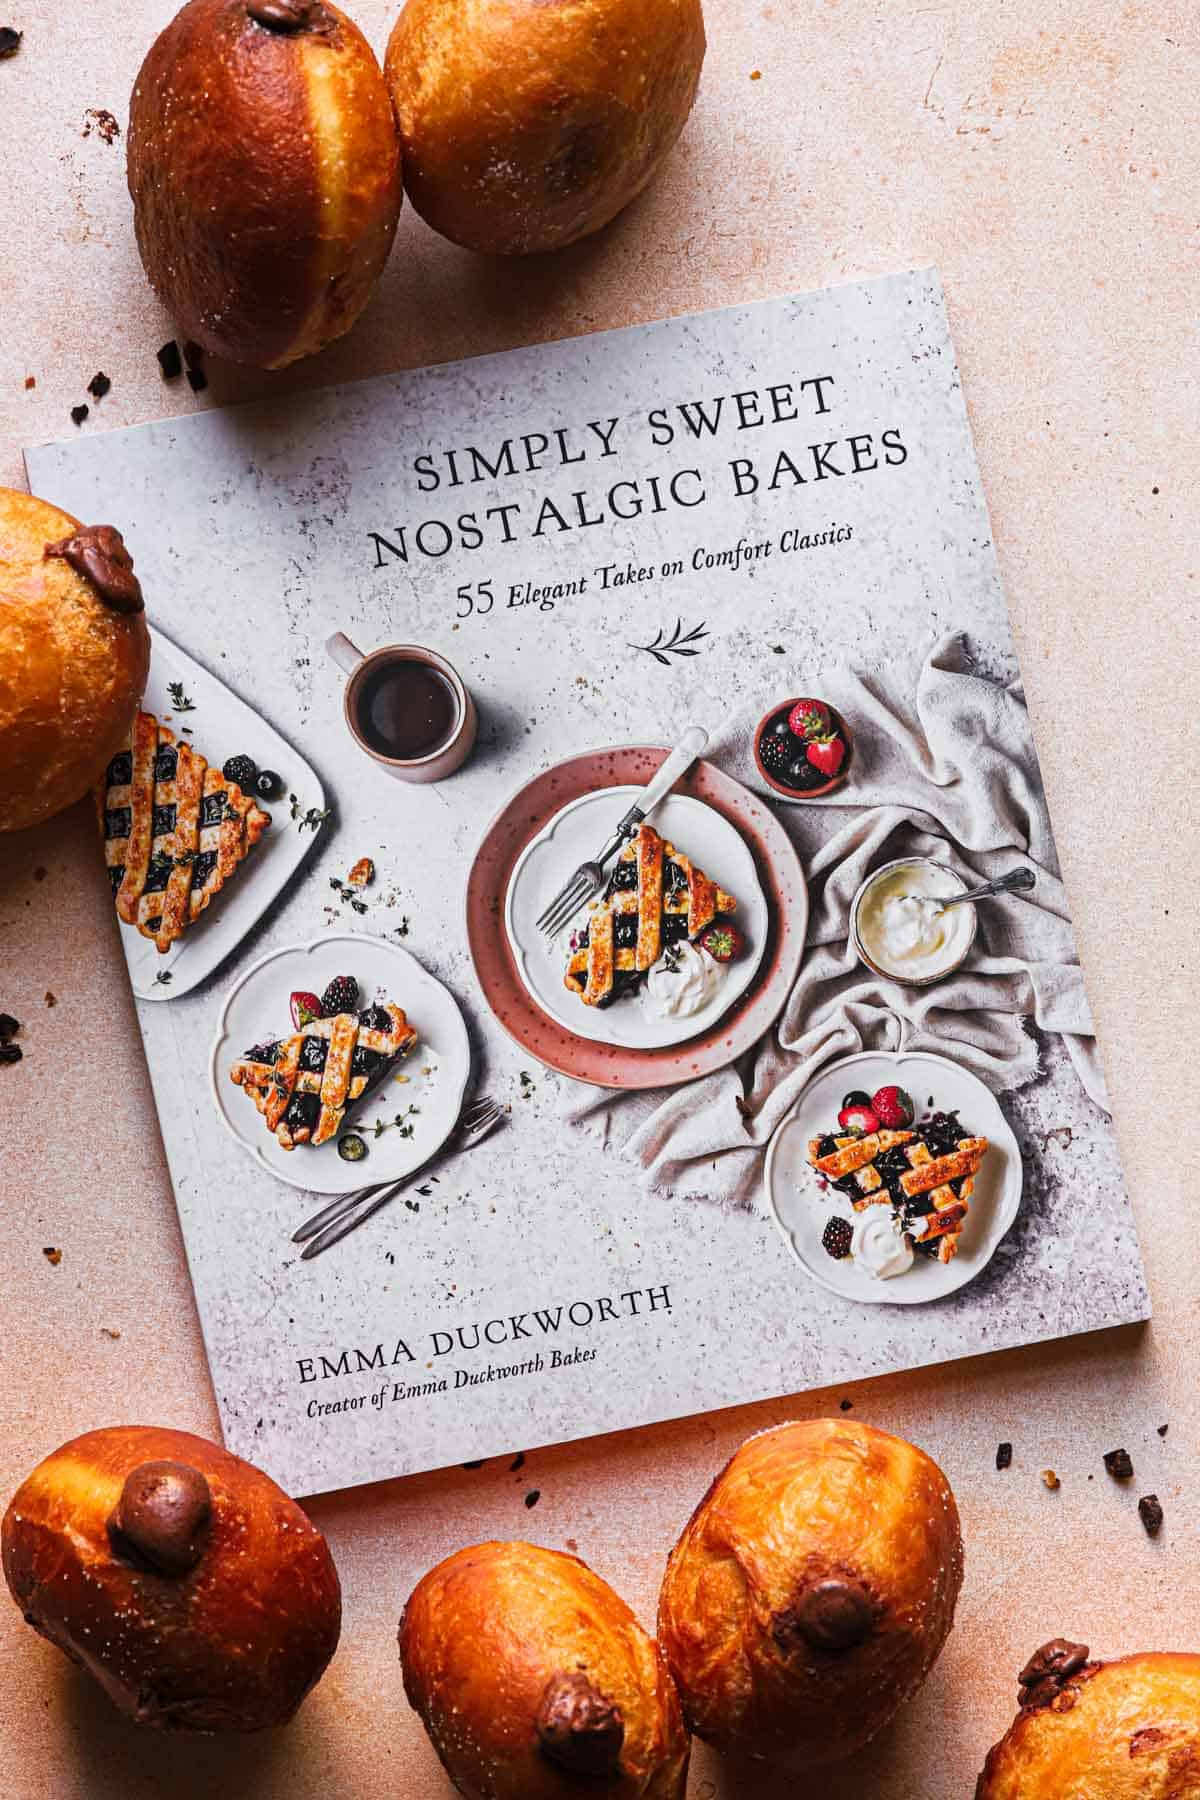 Simply sweet nostalgic bakes' cookbook cover